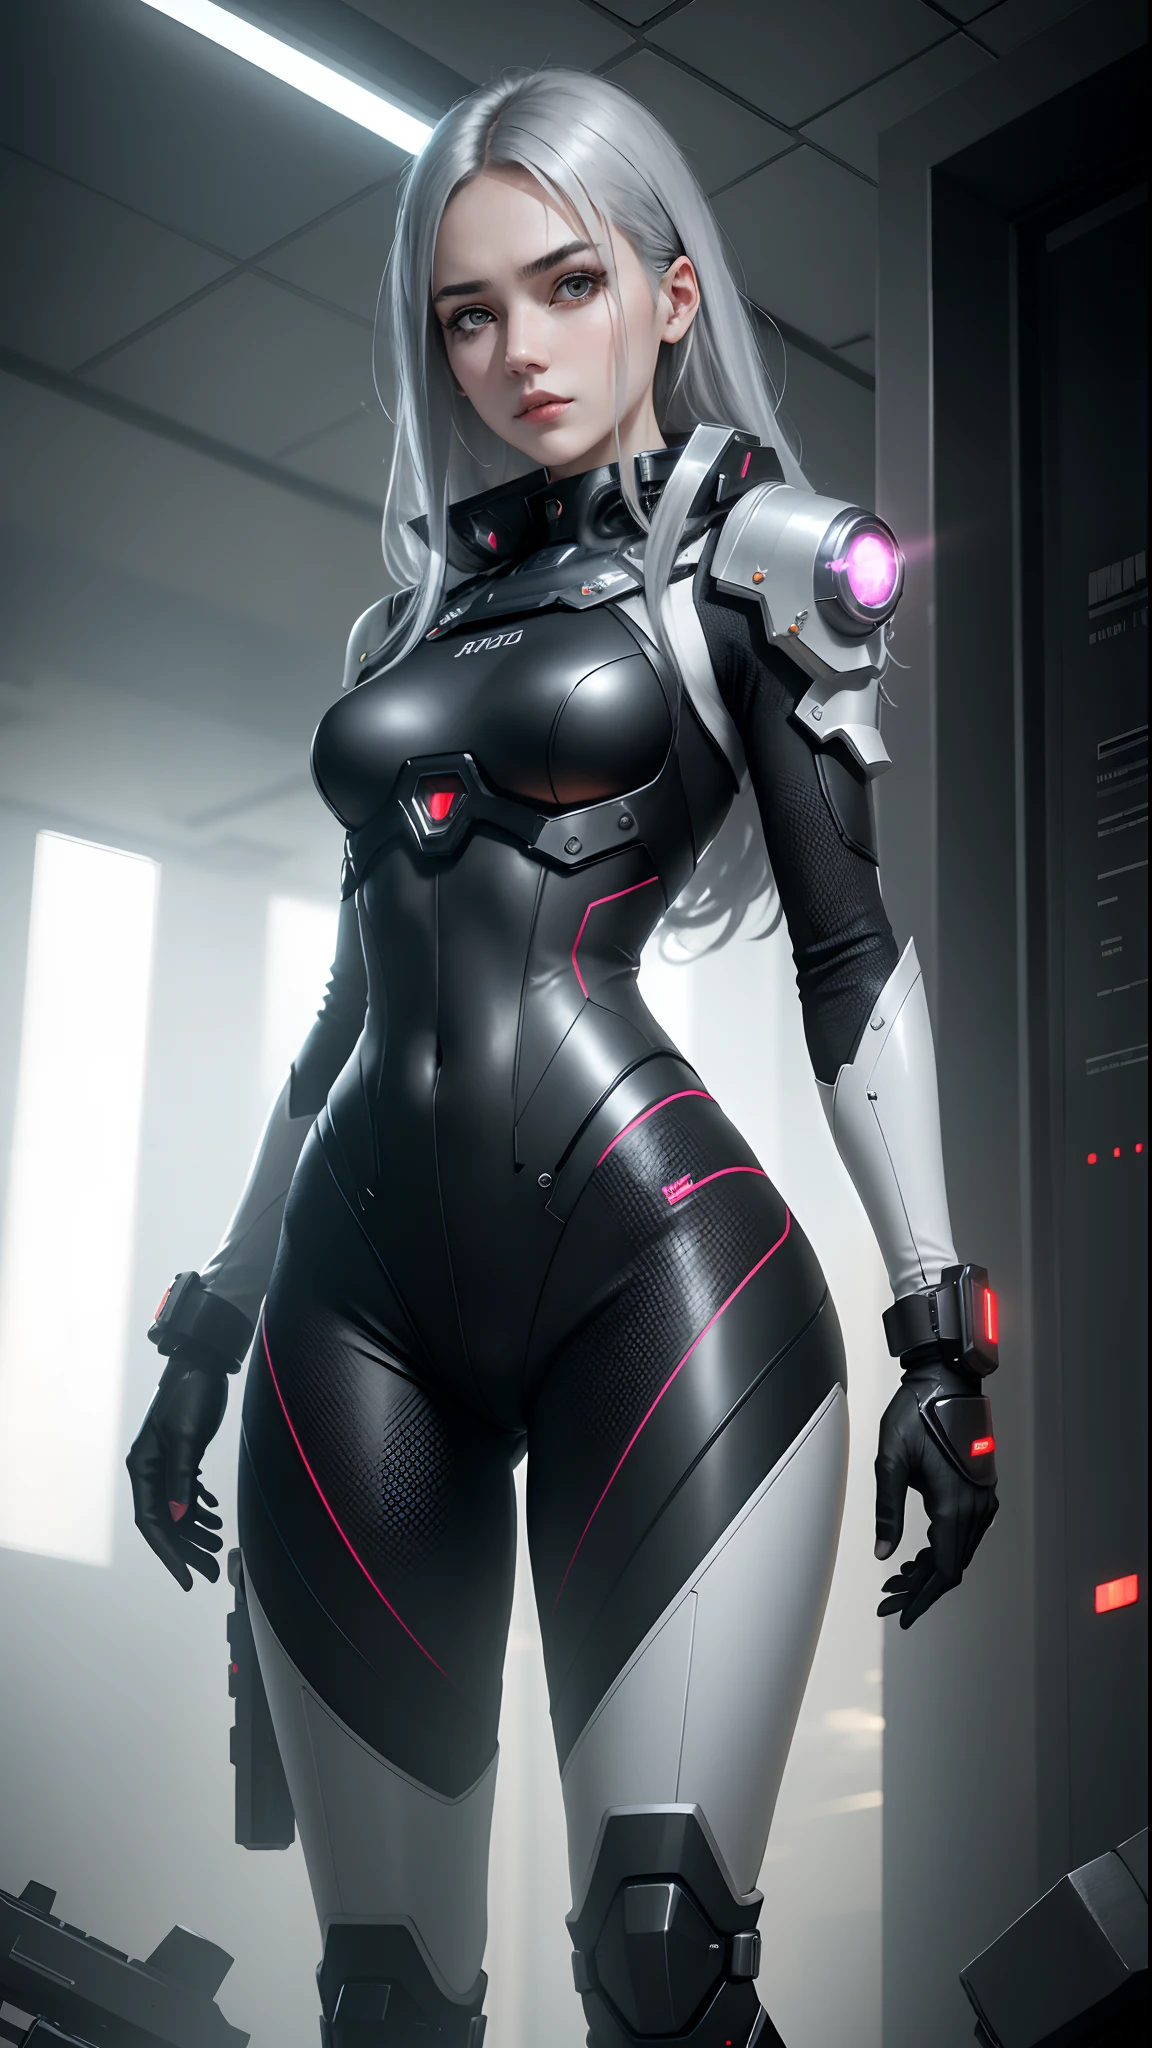 wearing black suit and mini tight skirt, anime style, silver color hair, (8k, RAW photo, best quality, masterpiece:1.2), a girl with calm and rational personality, demonstrating a loyal and efficient approach to her tasks, human-like aspect to her, possess emotions and empathy, leadership and cooperation would be crucial traits for her in order to support the mercenaries effectively, 6-foot-tall mechanical being with a silver metallic exterior, boasts a futuristic design, wears a black bodysuit with the emblem, sports data control gloves on her wrists, with small hardware interfaces on her fingertips, A small wing-like device is attached to her back, serving as equipment for high-speed movement and flight, waist carries a belt containing communication devices, hacking tools, and other accessories, ((Best quality)), ((masterpiece)), (highly detailed:1.3), 3D,Shitu-mecha, beautiful cyberpunk women with her mecha in the ruins of city from a forgoten war, ancient technology,HDR (High Dynamic Range),Ray Tracing,NVIDIA RTX,Super-Resolution,Unreal 5,Subsurface scattering,PBR Texturing,Post-processing,Anisotropic Filtering,Depth-of-field,Maximum clarity and sharpness,Multi-layered textures,Albedo and Specular maps,Surface shading,Accurate simulation of light-material interaction,Perfect proportions,Octane Render,Two-tone lighting,Low ISO,White balance,Rule of thirds,Wide aperature,8K RAW,Efficient Sub-Pixel,sub-pixel convolution,luminescent particles,light scattering,Tyndall effect